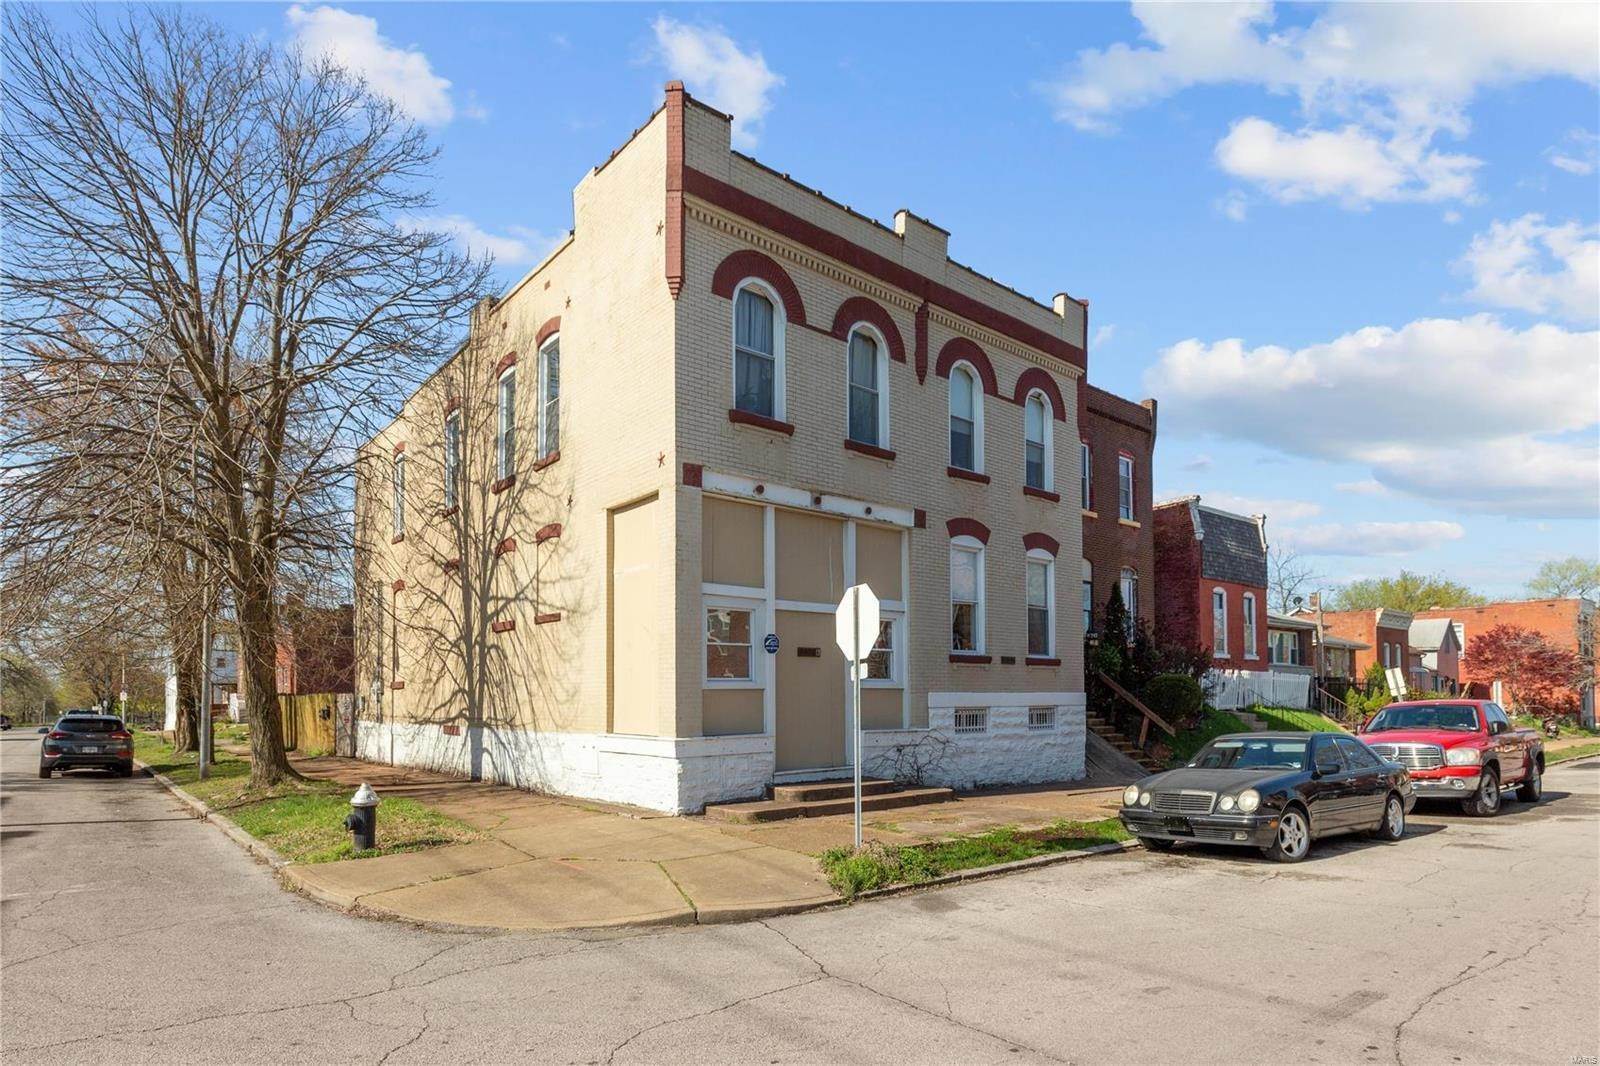 Property for Sale at 3000 Mount Pleasant Street St. Louis, Missouri 63111 United States